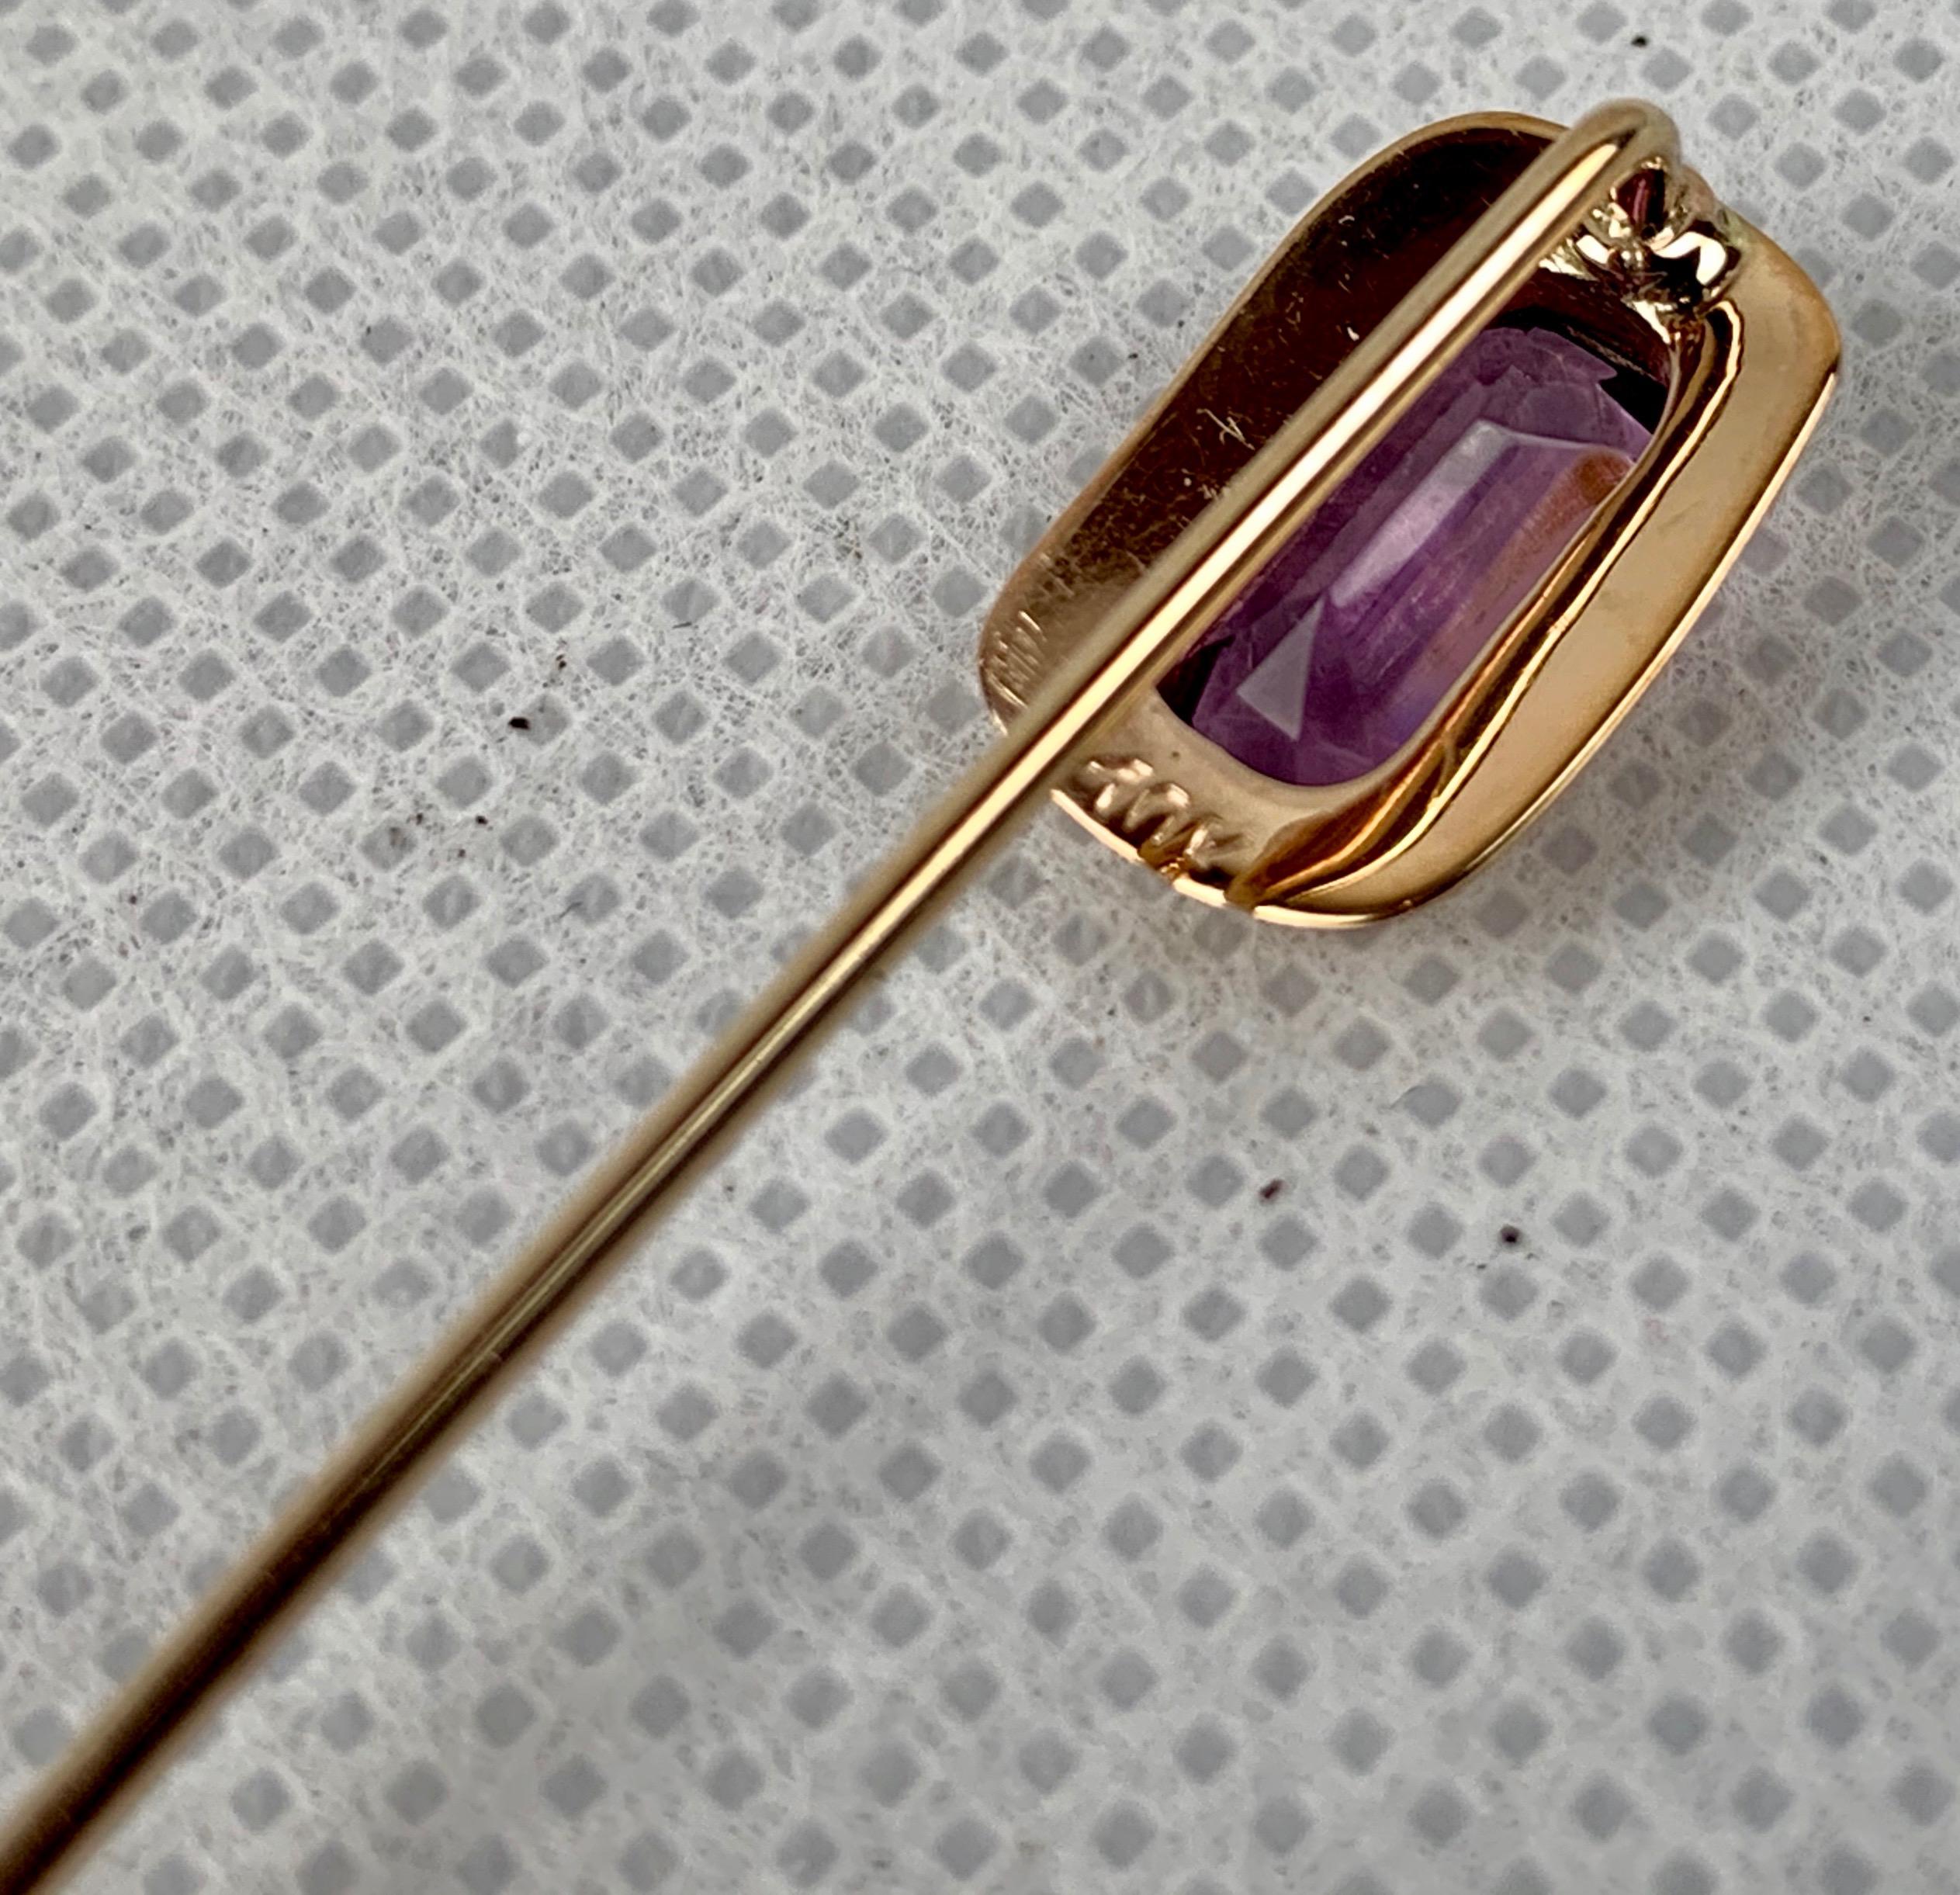 Victorian Stickpin with a Rectangular Frame, Faceted Amethyst & Hand Engraved-10k y.g. For Sale